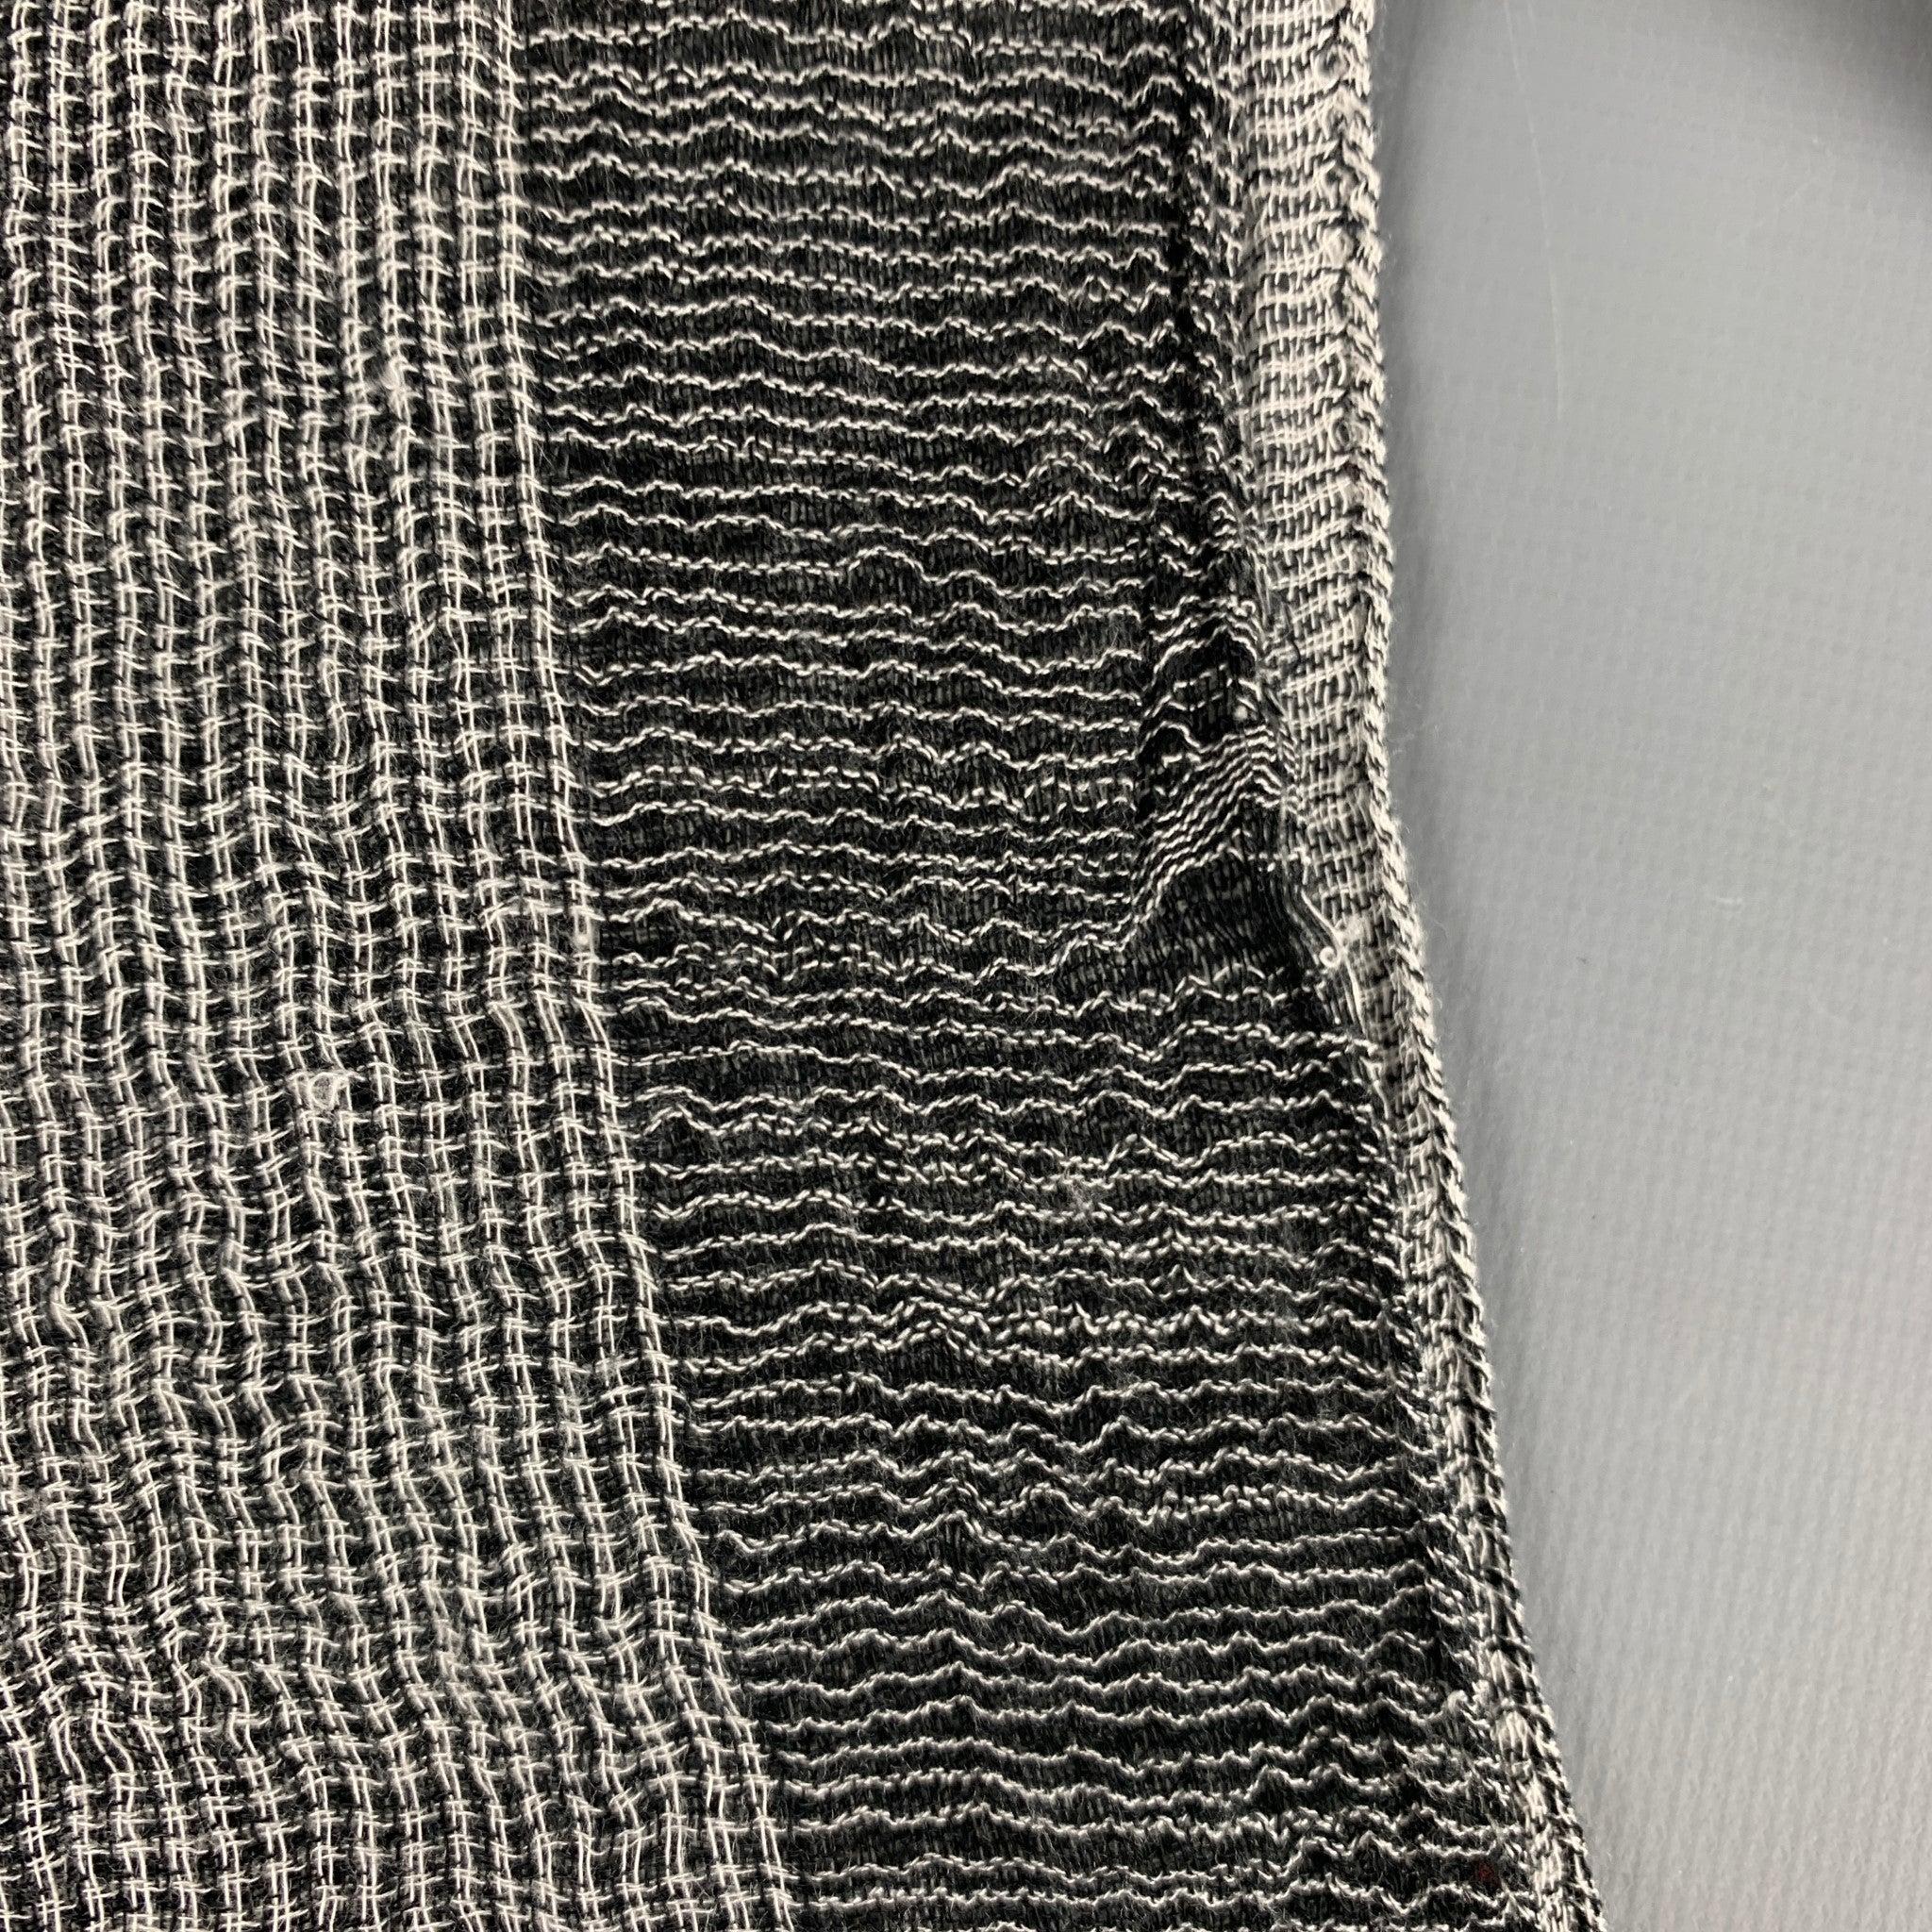 JOHN VARVATOS Black White Viscose Modal Scarf In Good Condition For Sale In San Francisco, CA